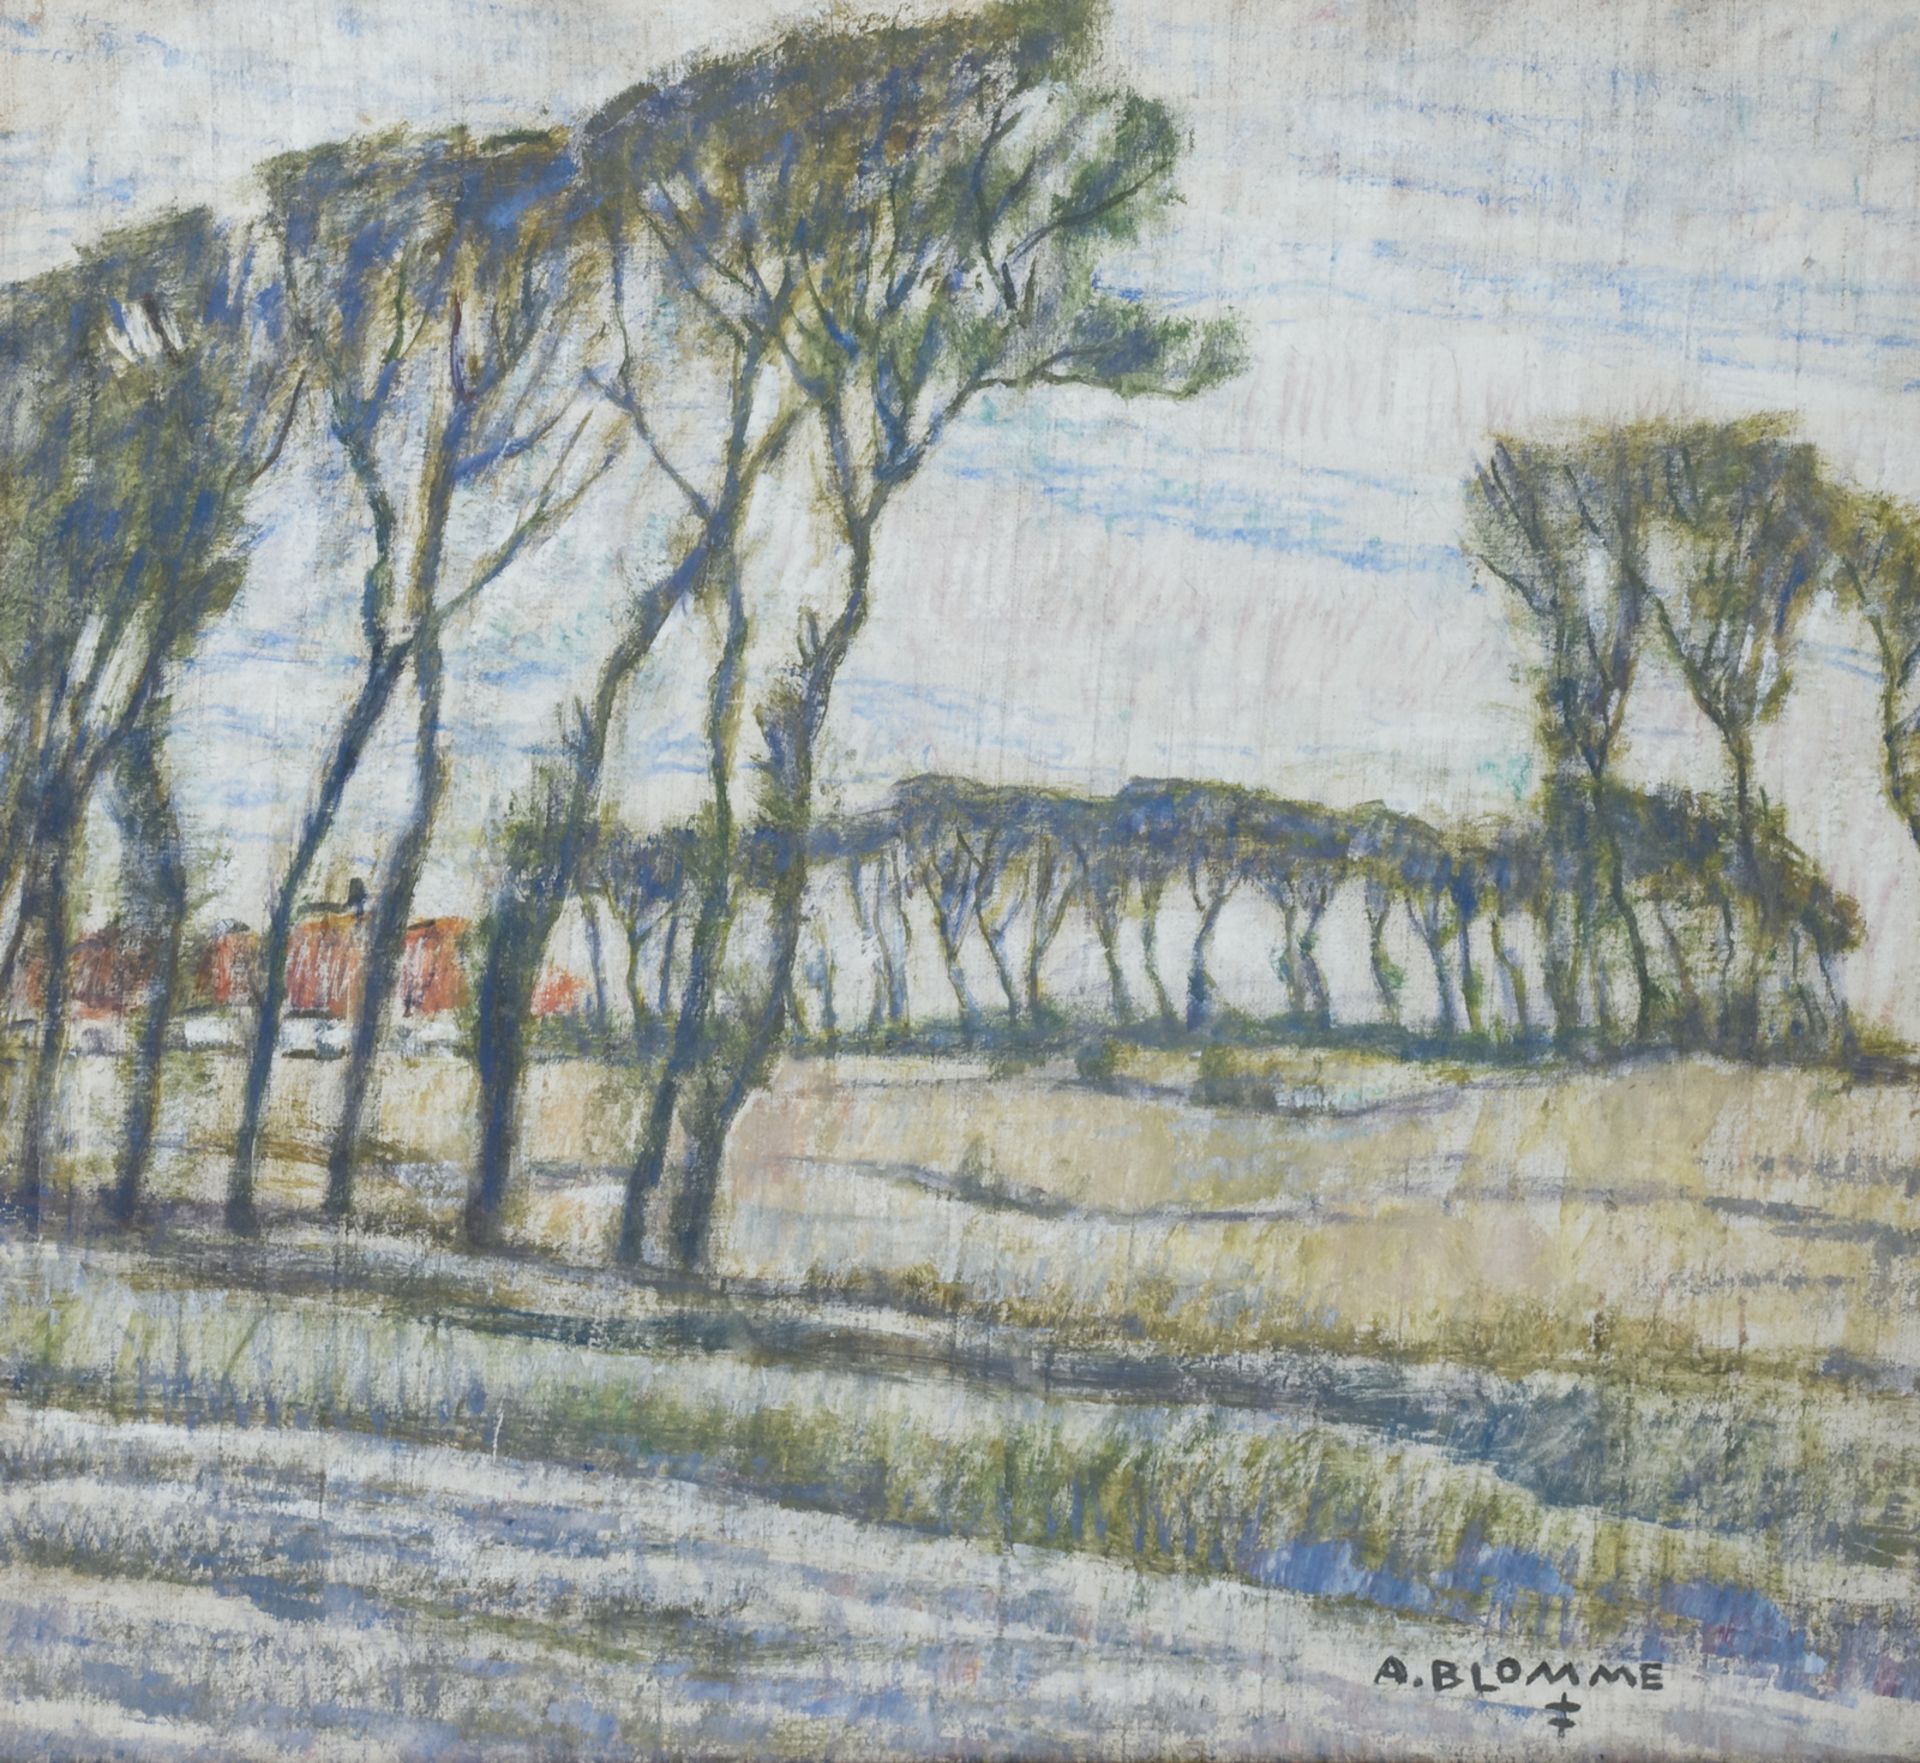 Blomme A., a rural view, oil on canvas, 55 x 58,5 cm